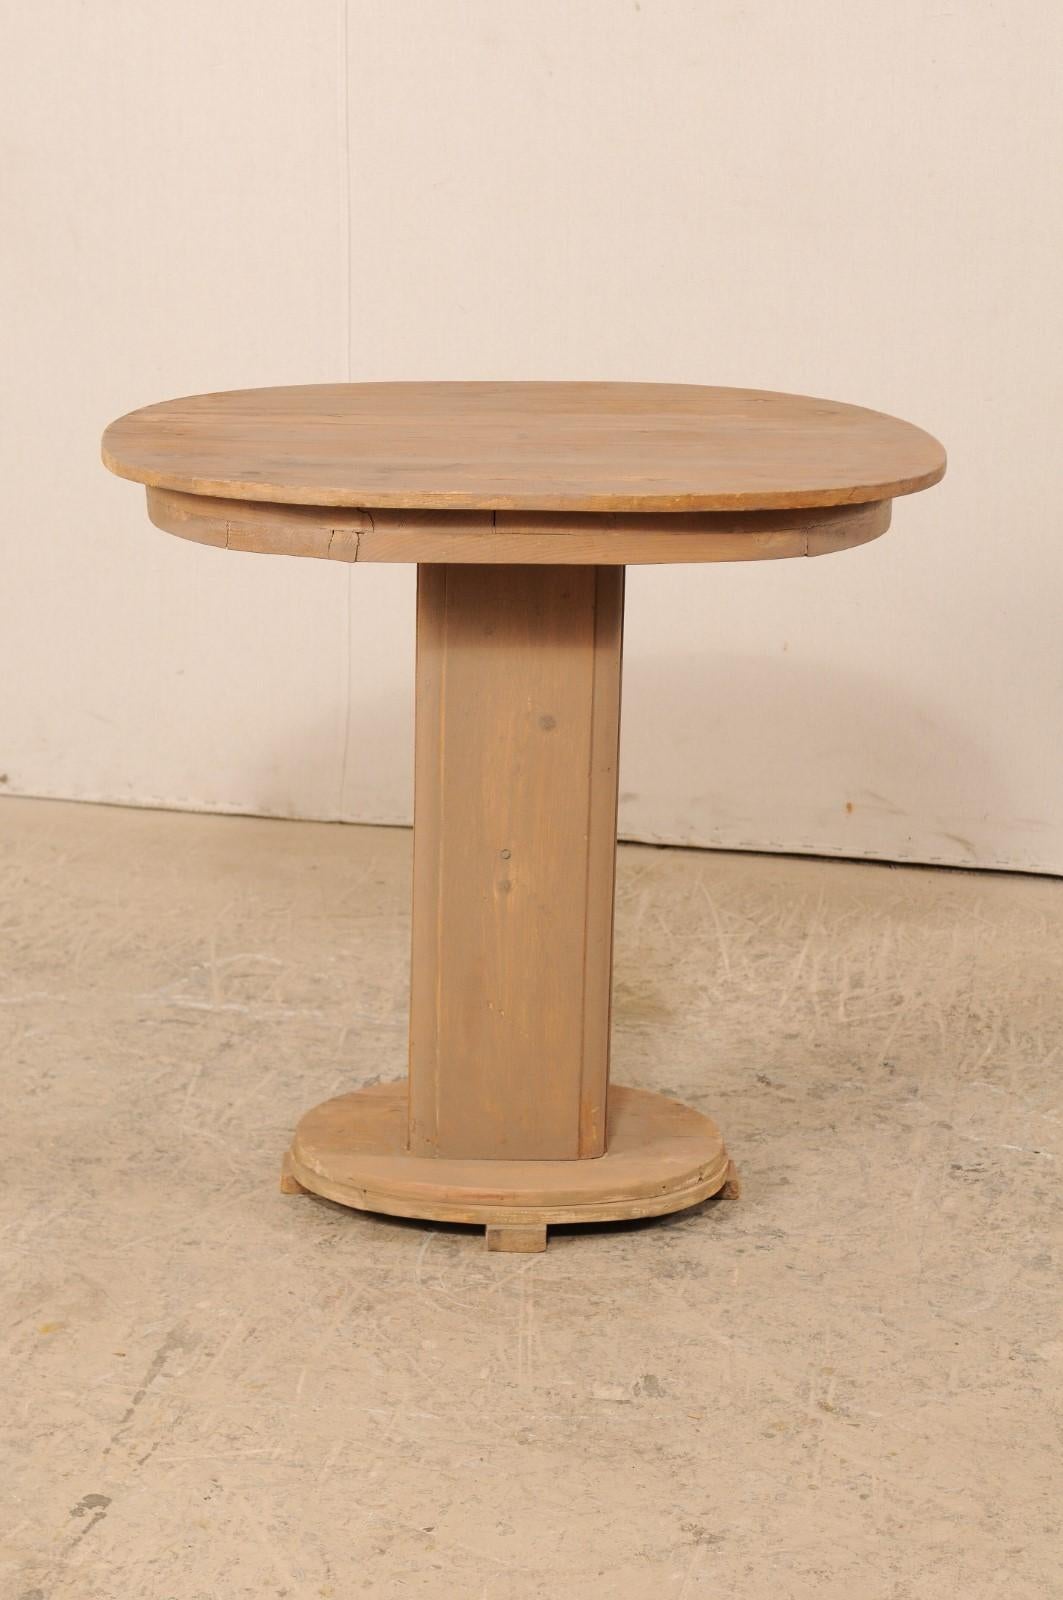 French Mid-20th Century Painted Wood Oval Top Pedestal Table For Sale 6